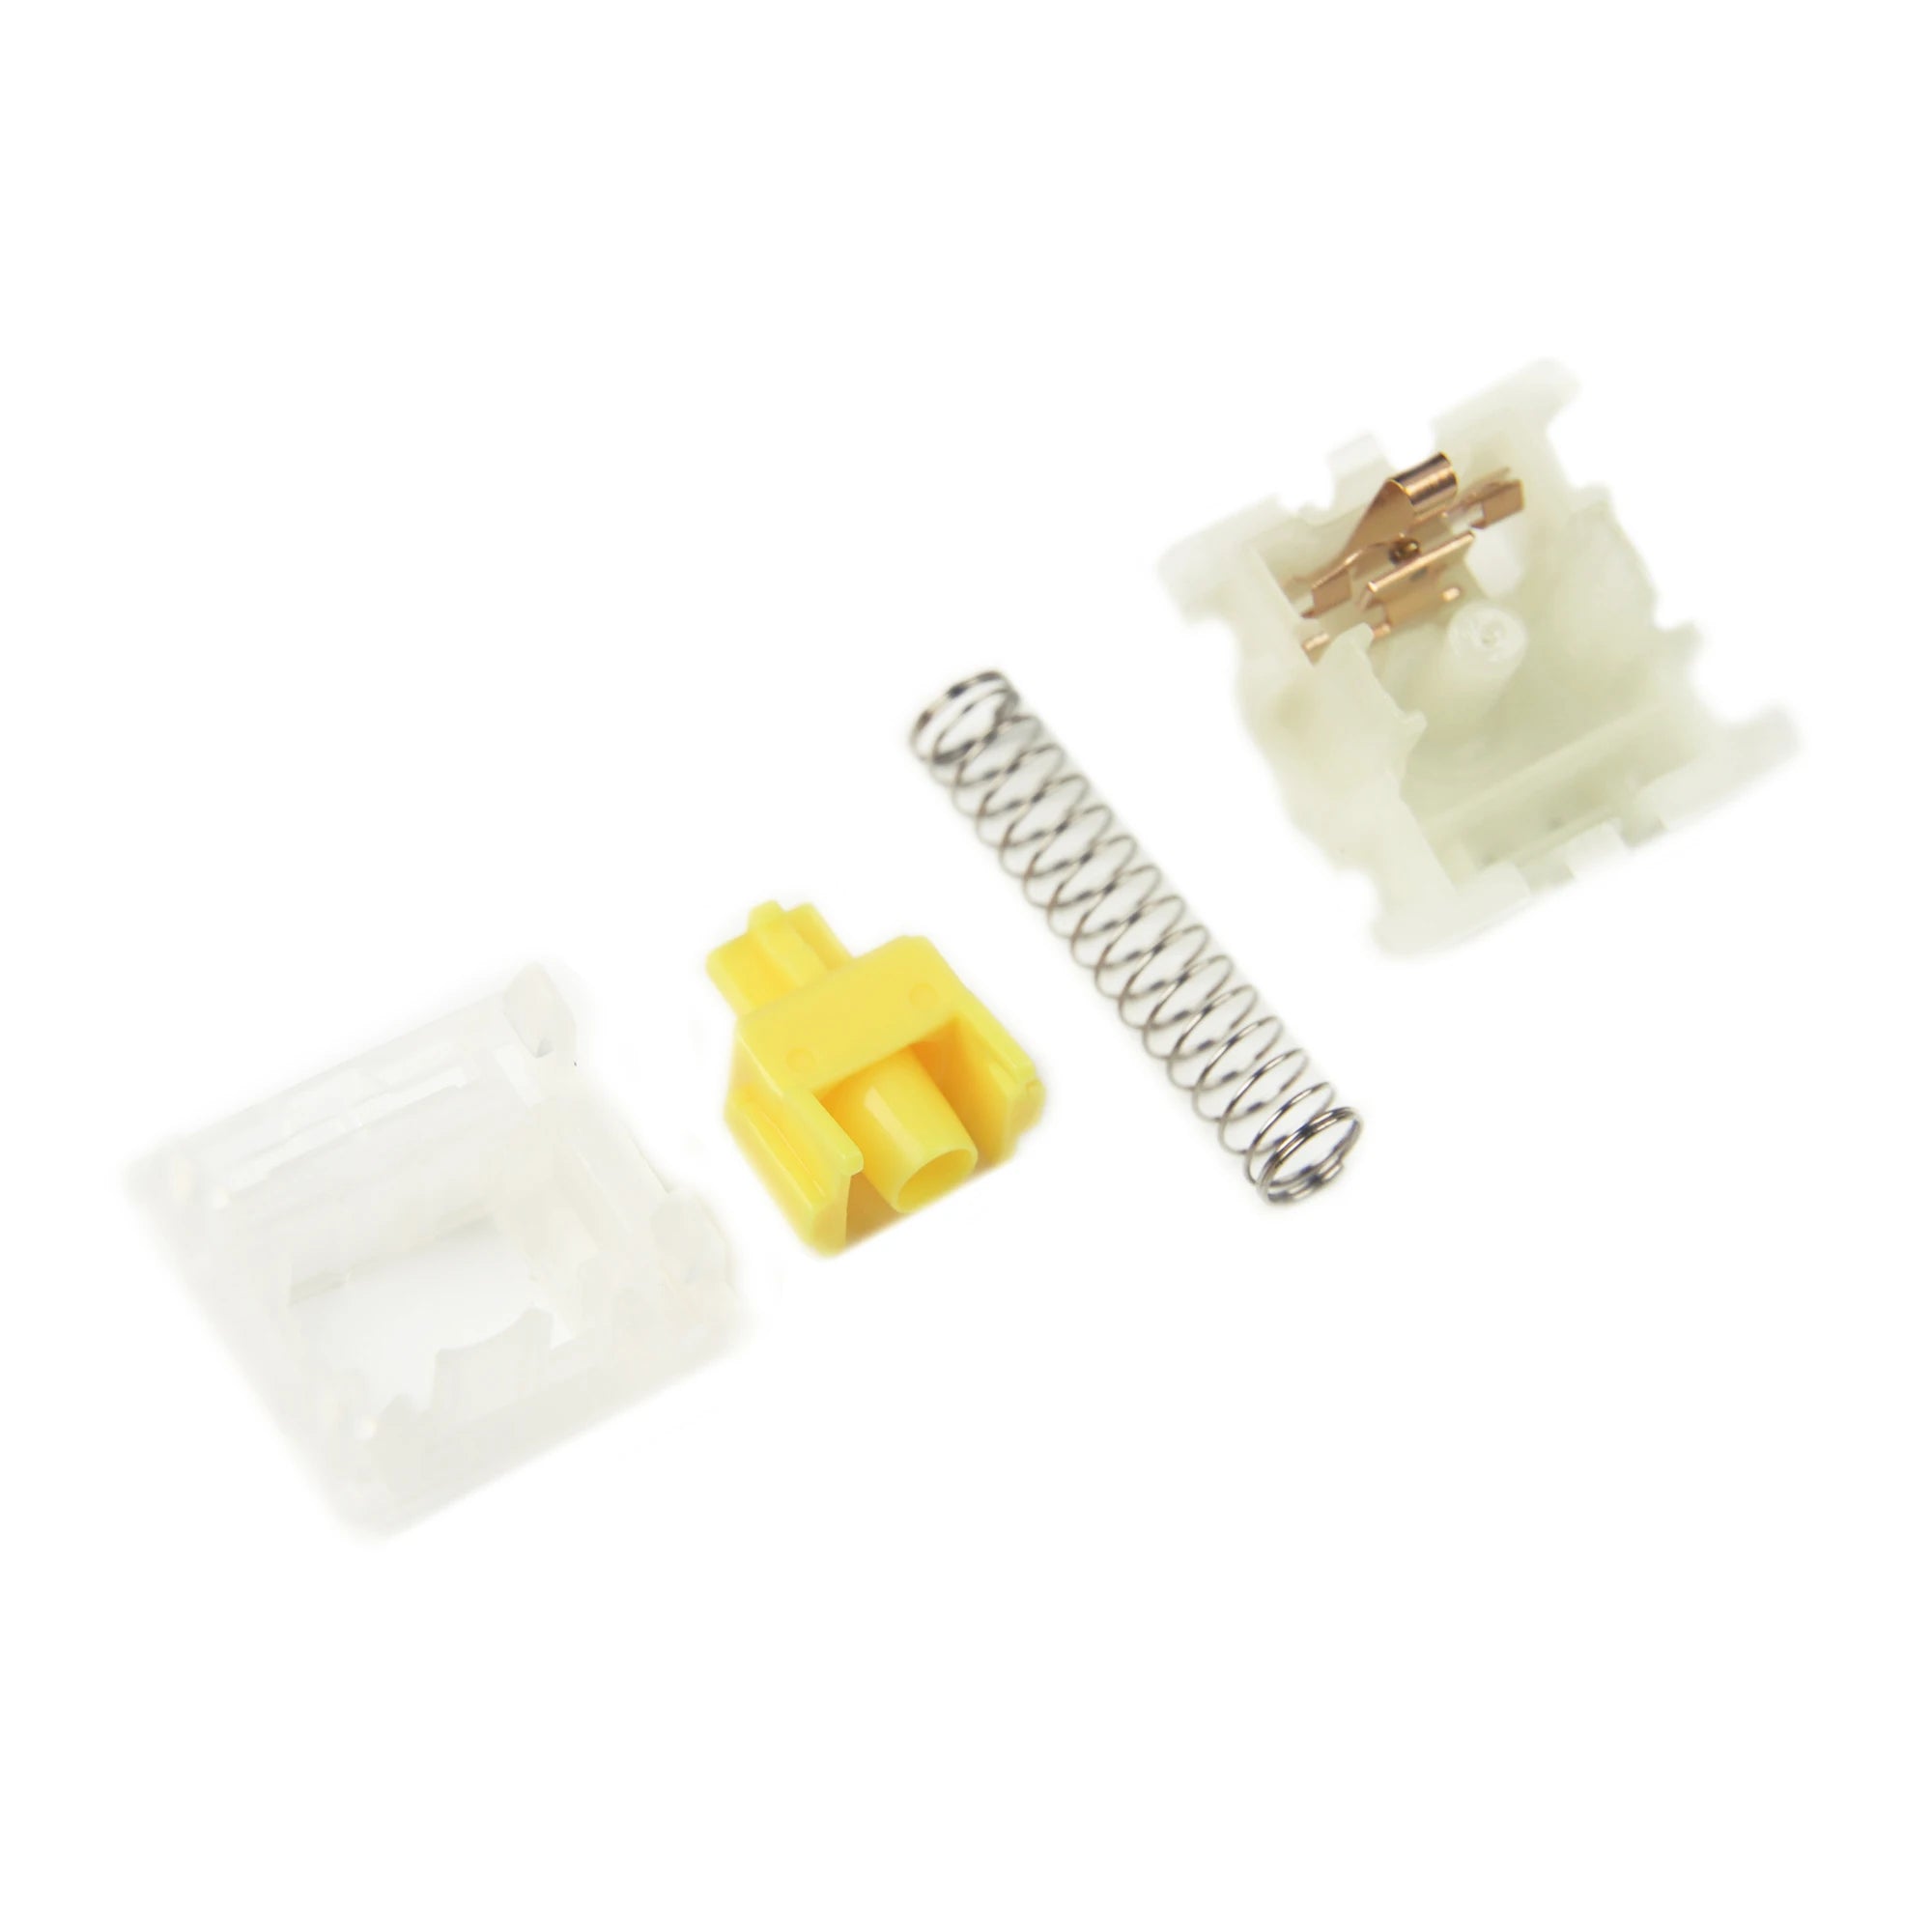 Gateron CAP Milky Linear Yellow V2 Switches - 63g Actuation - 5pin Compatibility